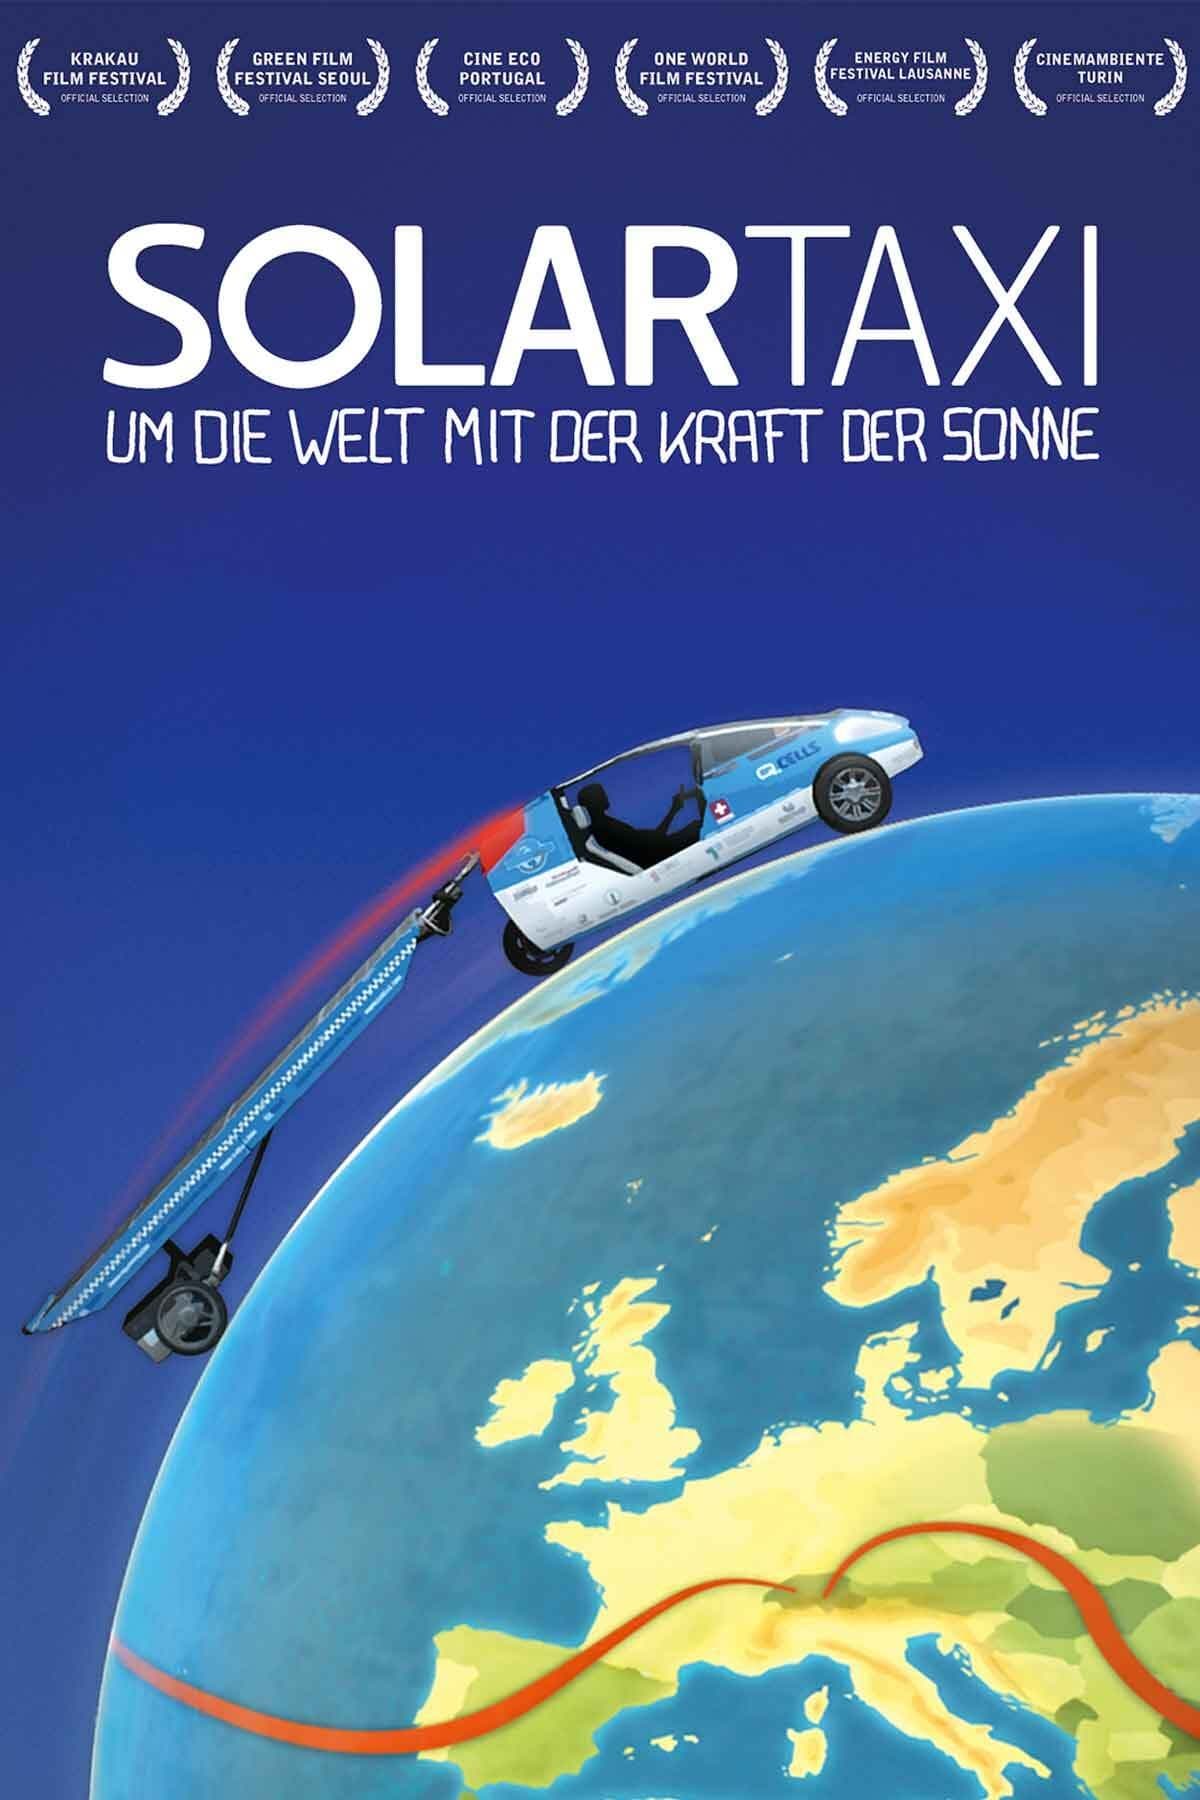 Solartaxi: Around the World with the Sun